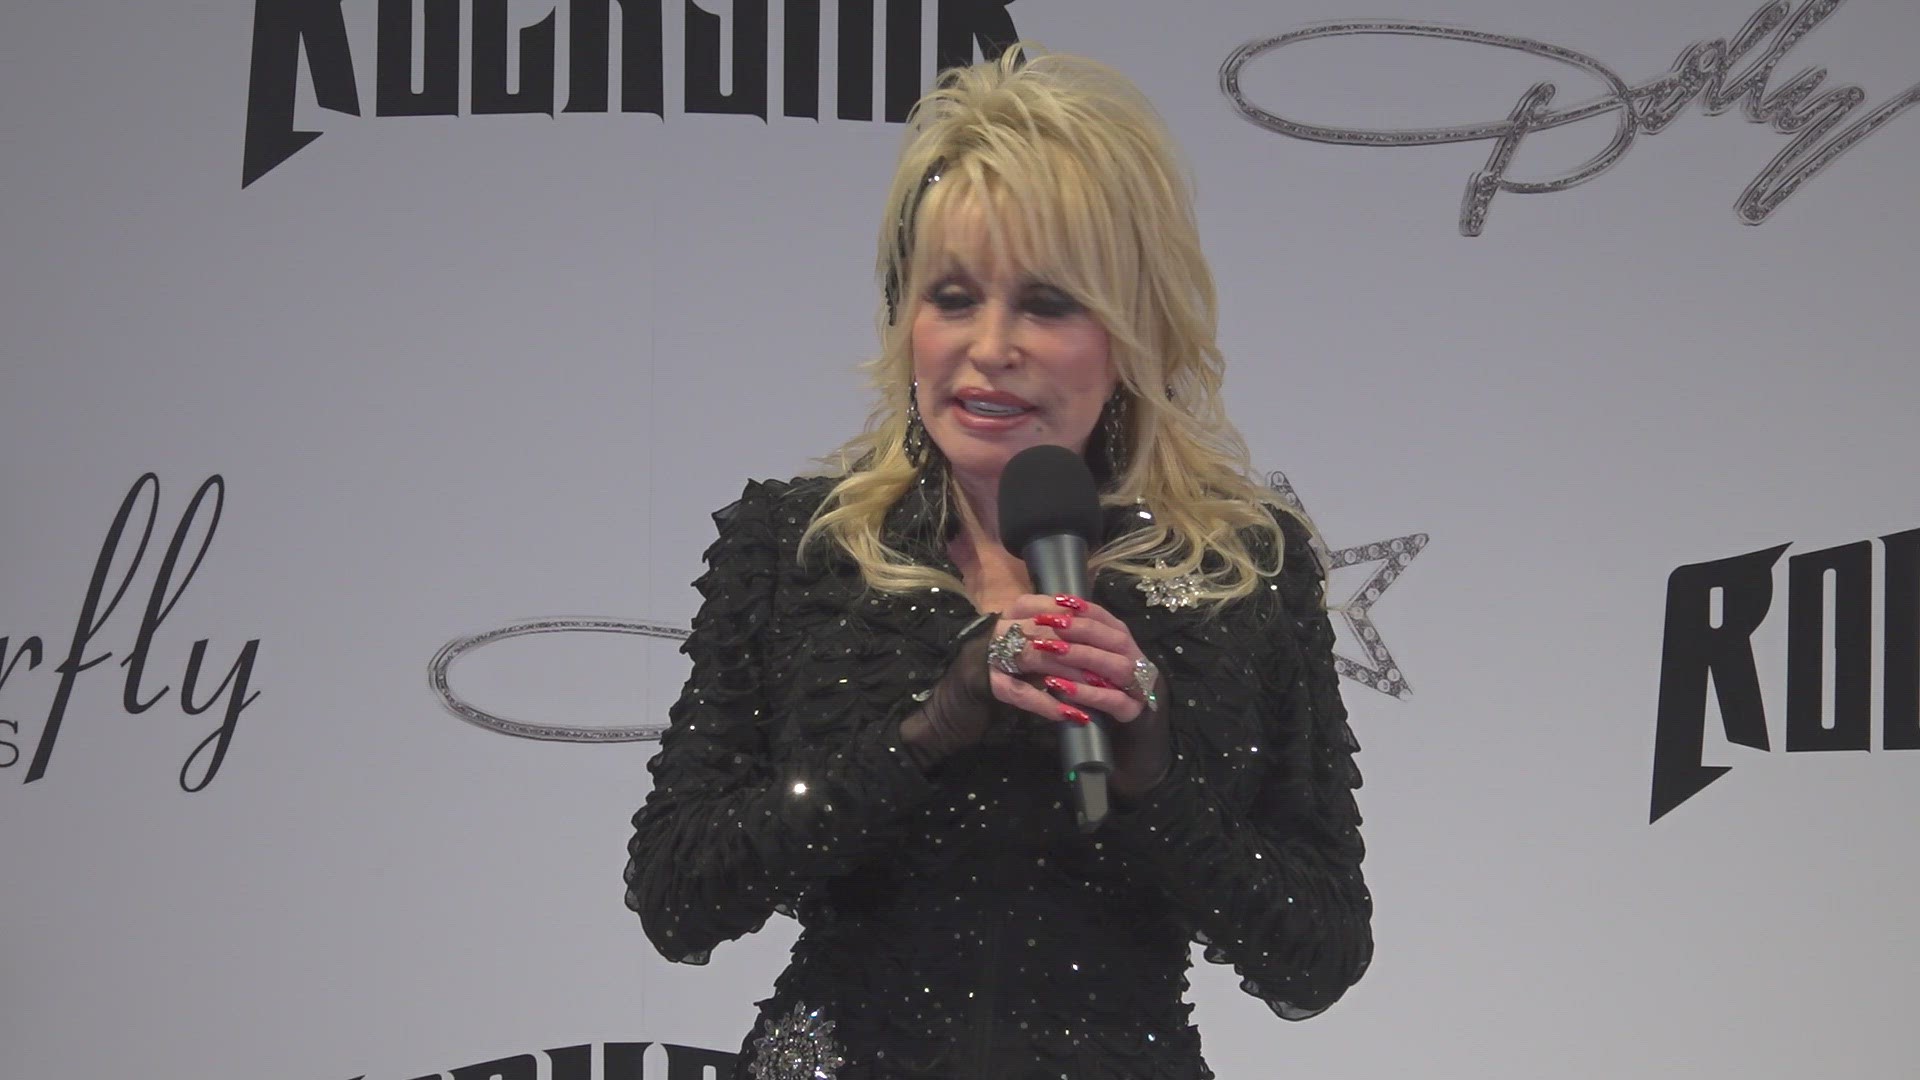 Dolly Parton gave her perspective on the recent Allen outlet mall shooting that happened on Saturday.